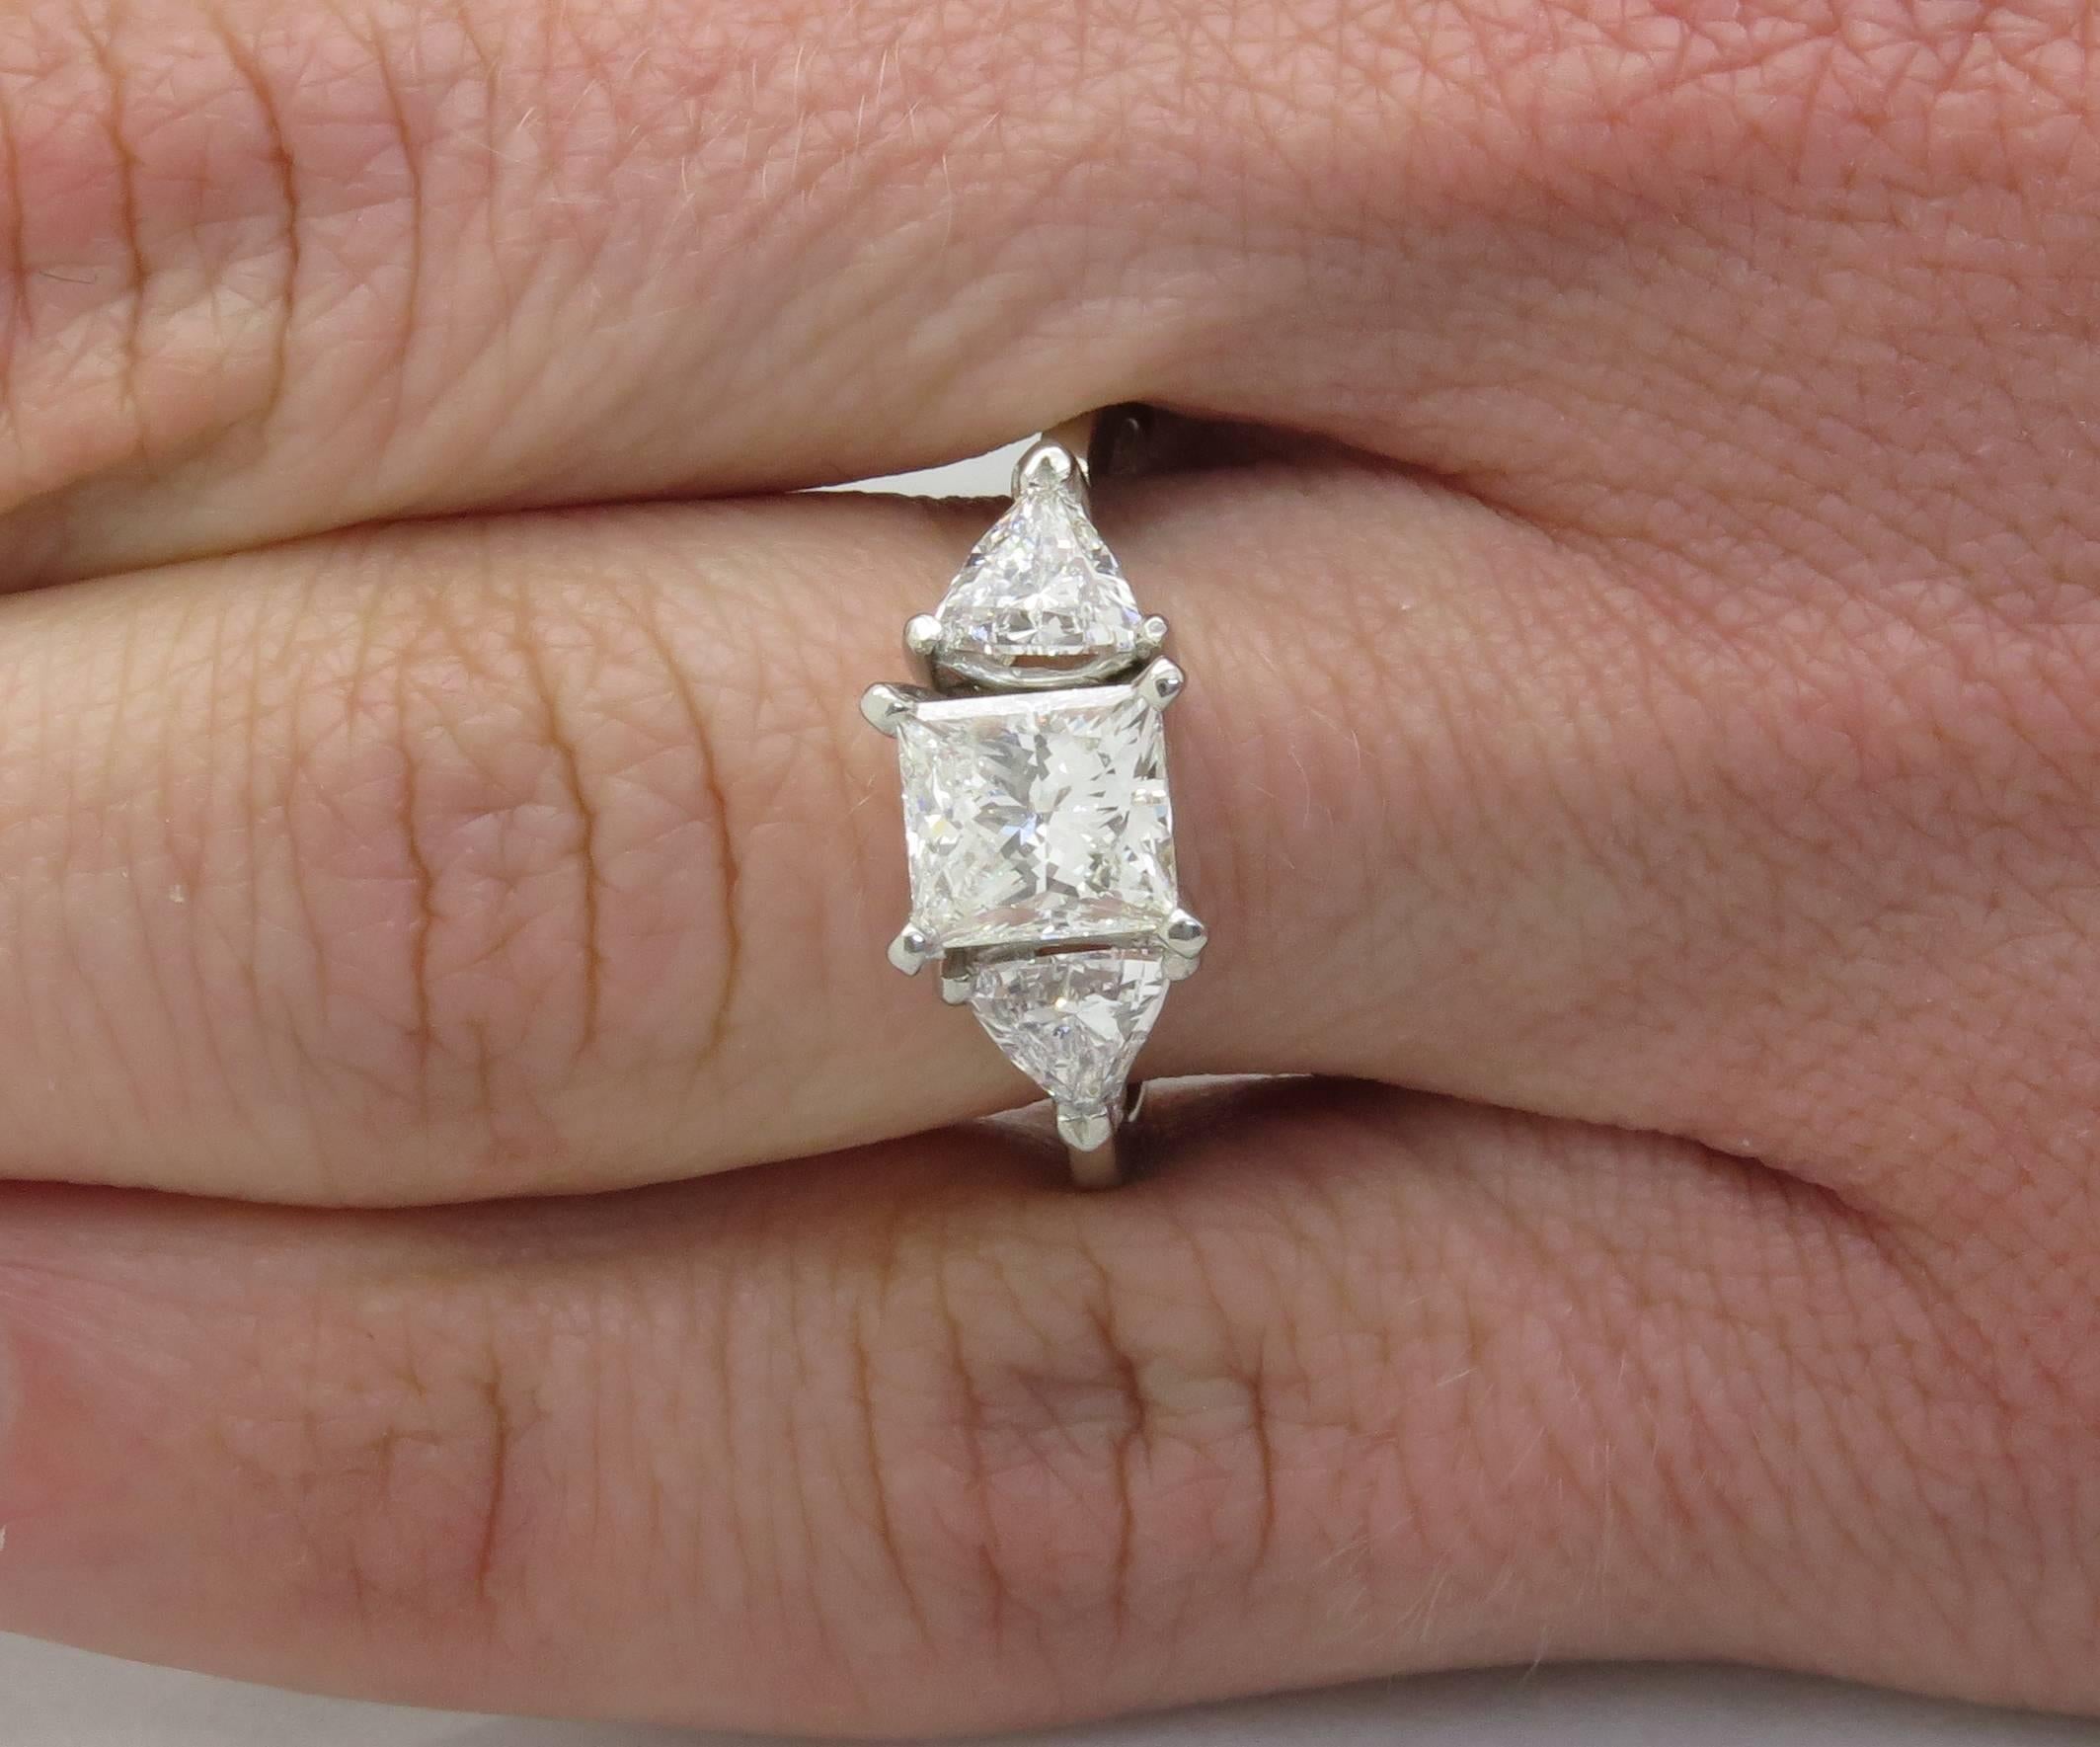 This platinum ring features a GIA Certified 1.23CT Princess Cut Diamond, with two Trilliant Cut Diamonds flanking it. The center diamond has G color and VS2 clarity. The total diamond weight is approximately 2.02CTW. The platinum ring is size 6.5